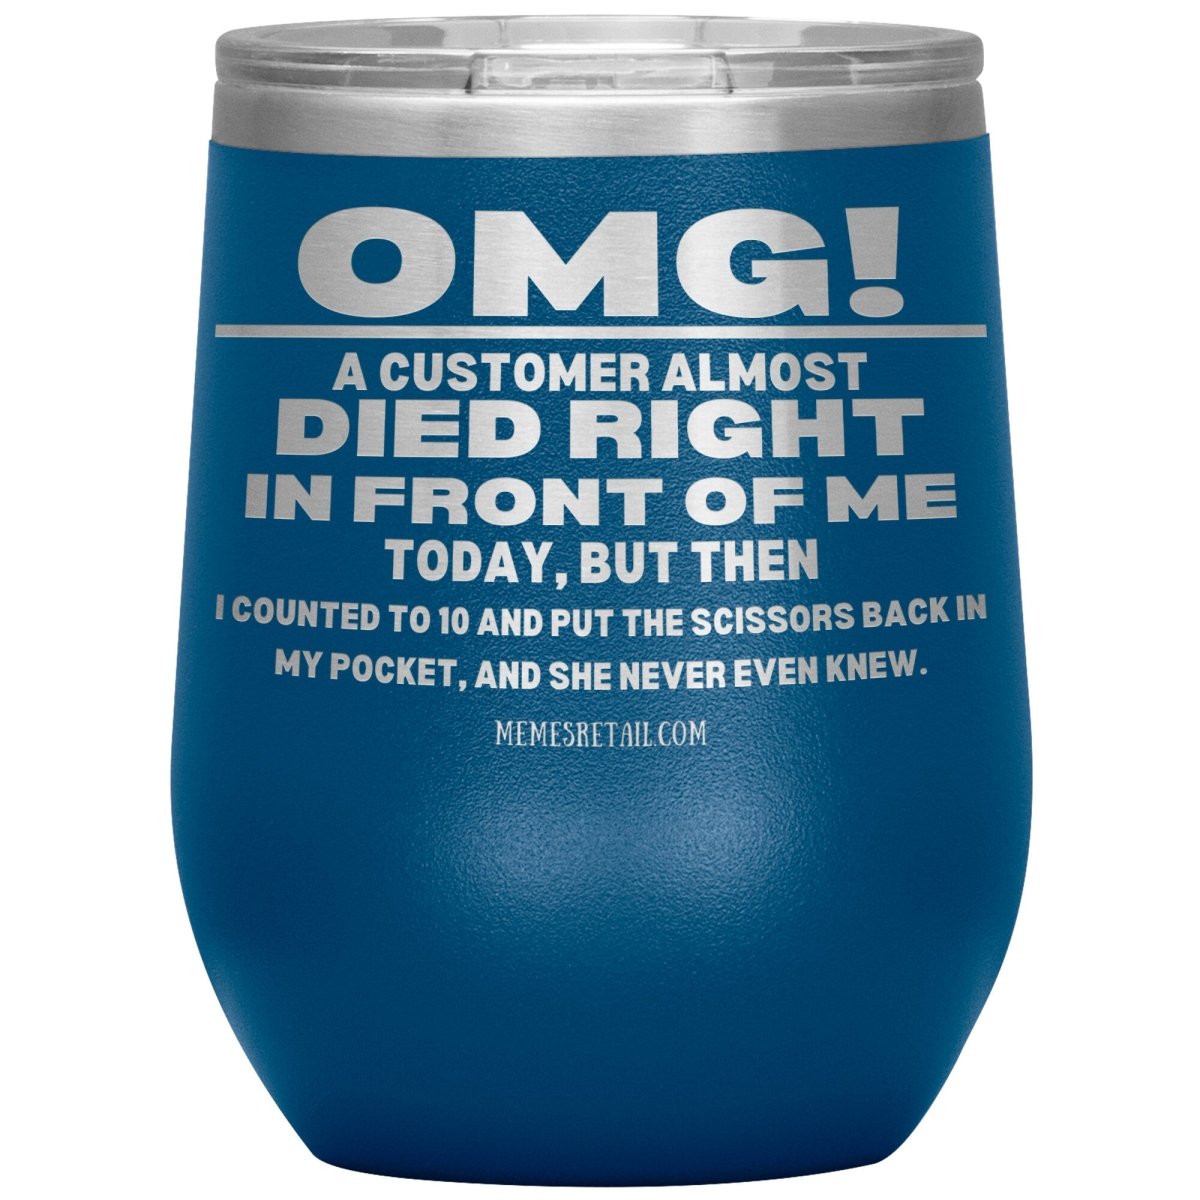 OMG! A Customer Almost Died Right In Front Of Me Tumbler, 12oz Wine Insulated Tumbler / Blue - MemesRetail.com